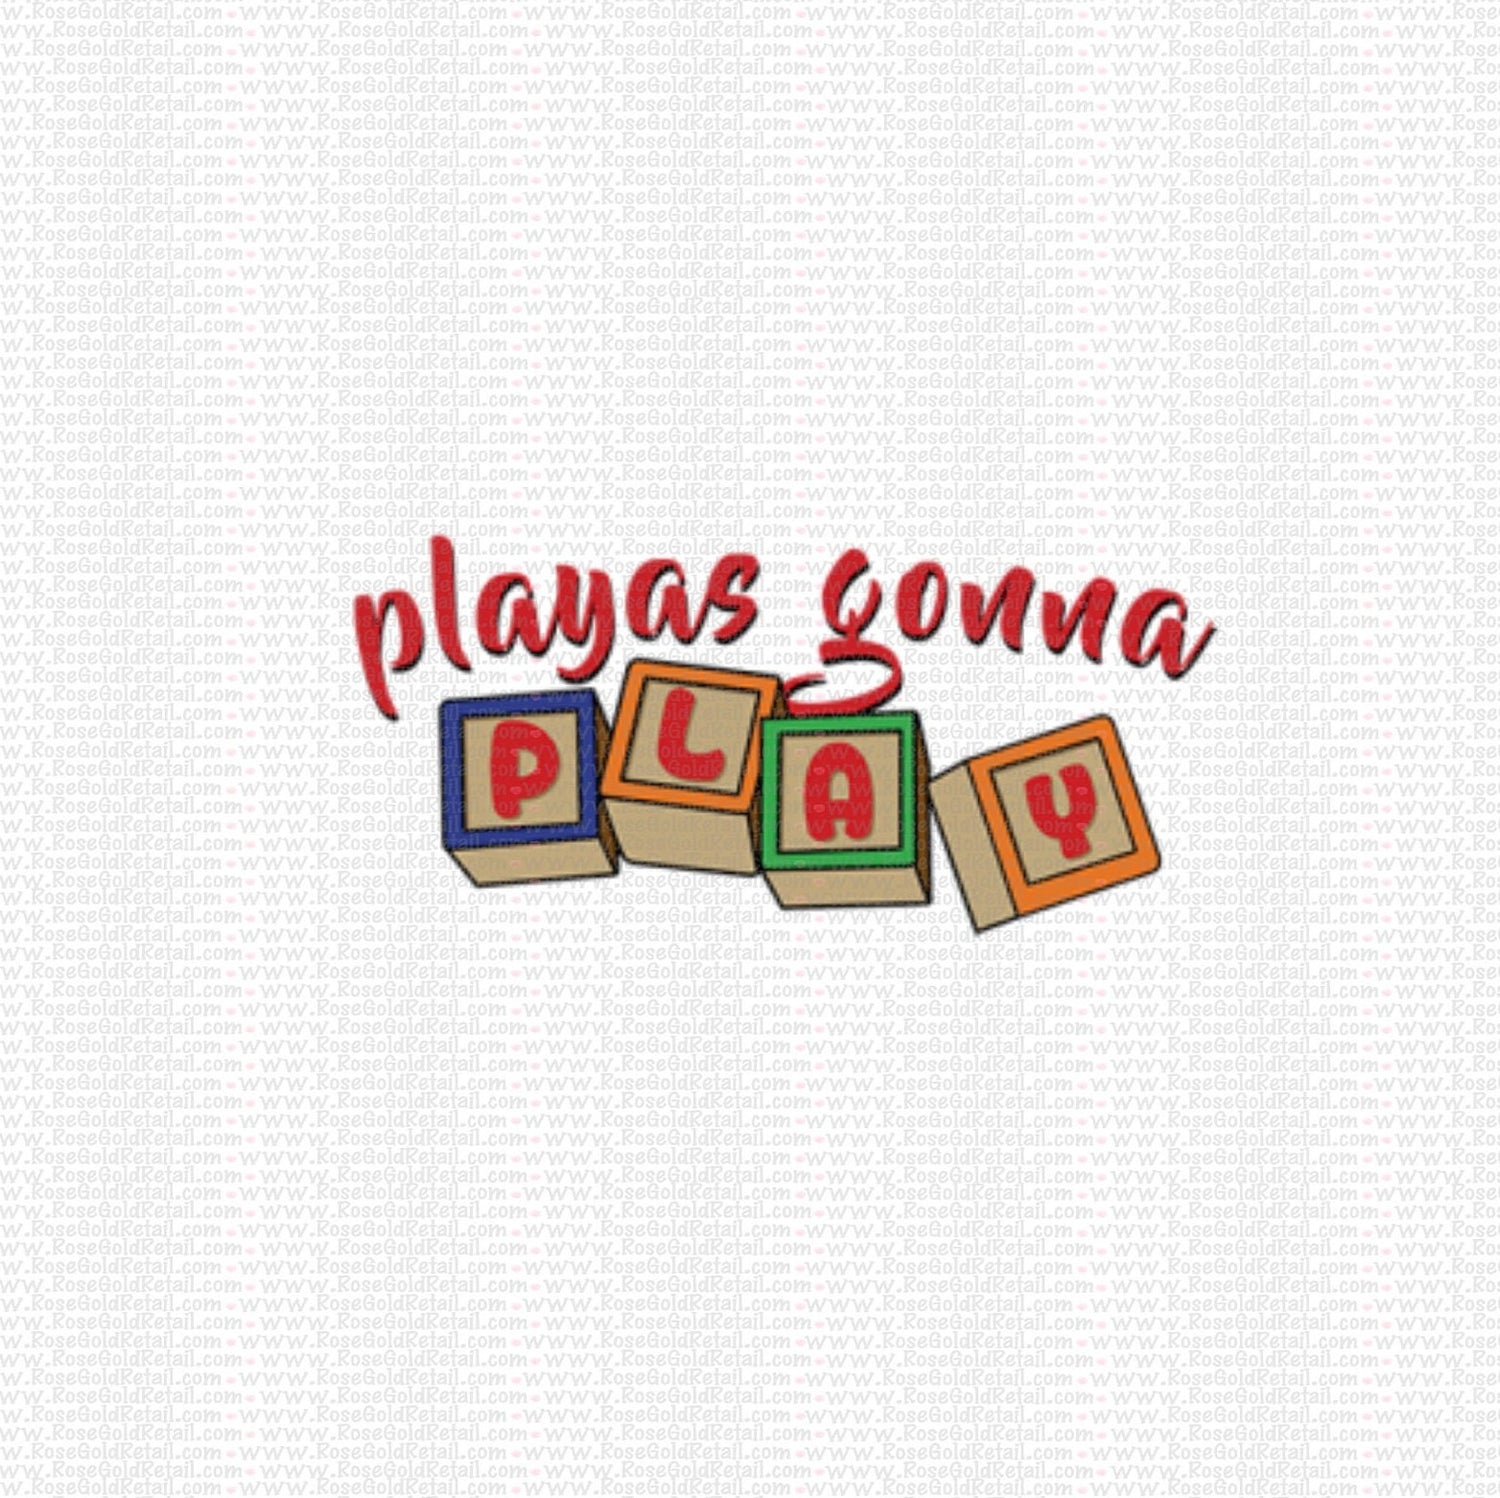 Playas Gonna Play - Baby Screen Print, Funny Screen Print for Kids, Heat Transfer for Baby, Shirt Designs for Toddlers